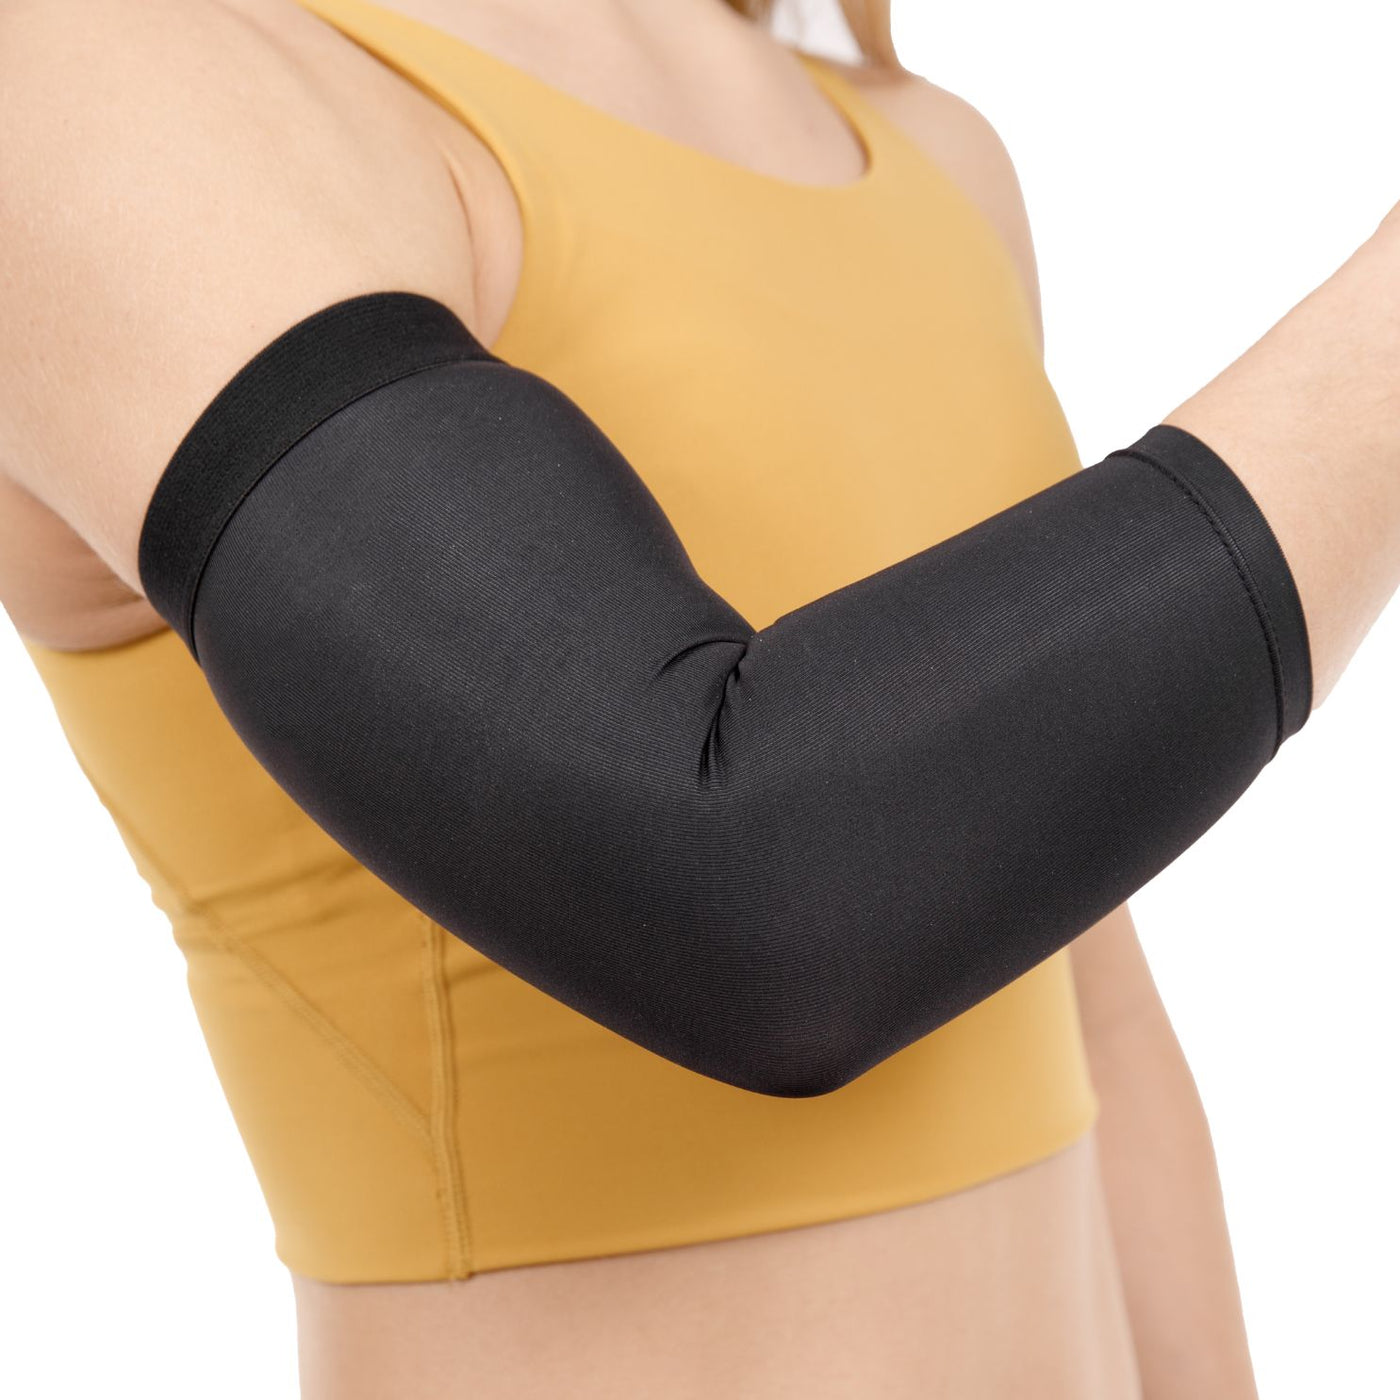 COPPER COMPRESSION RECOVERY ELBOW SLEEVE - HIGHEST COPPER CONTENT